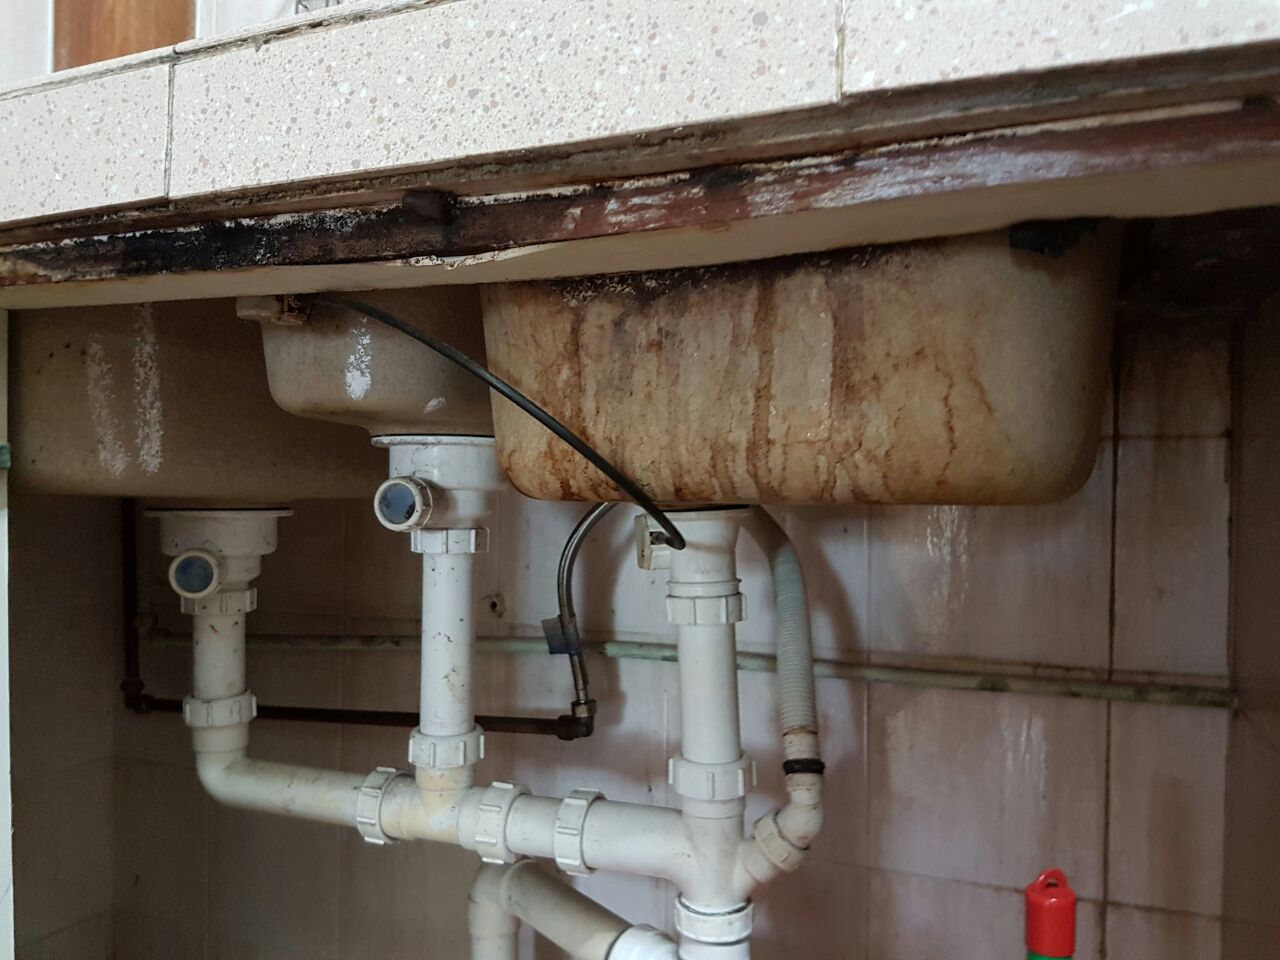 local-plumbing-services-leaking-kitchen-sink